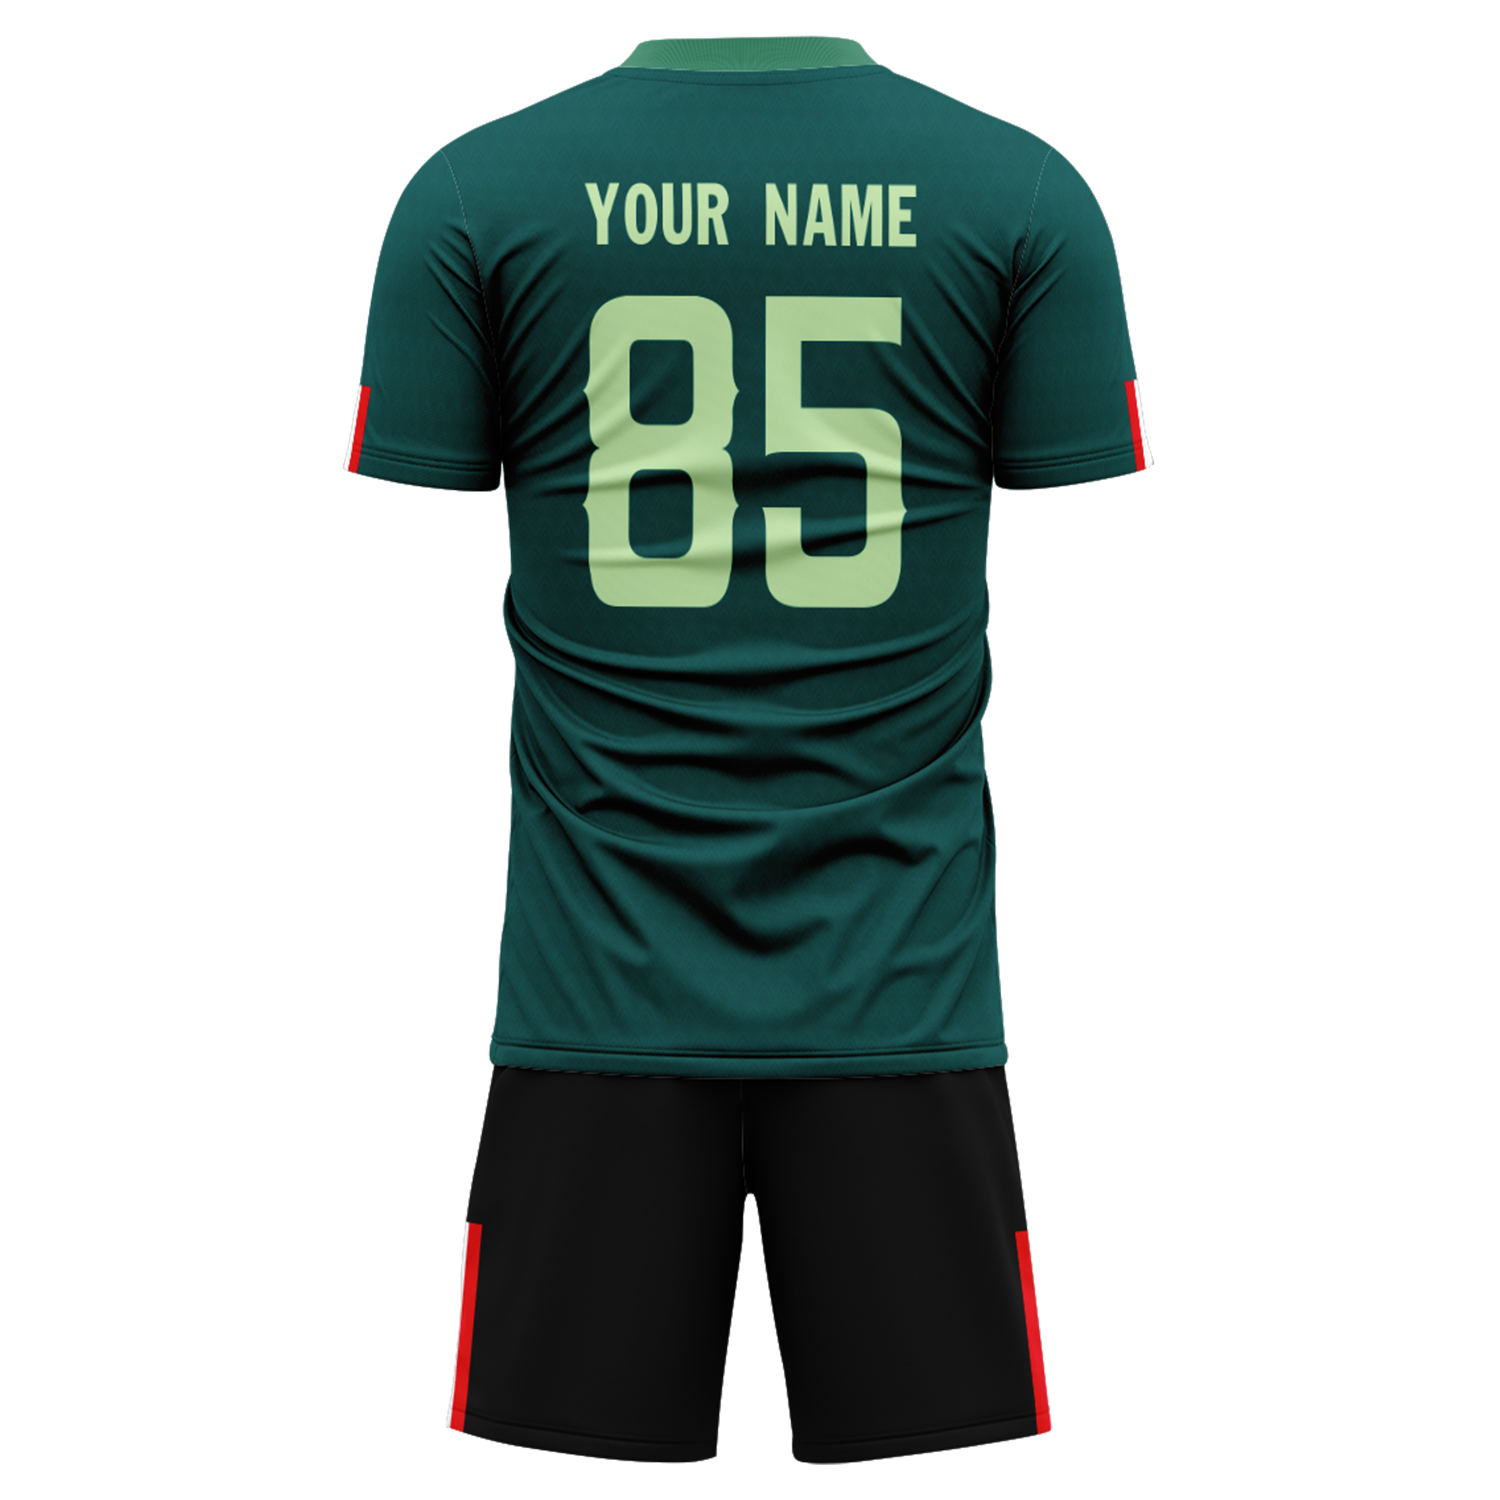 Custom Mexico Team Football Suits Personalized Design Print on Demand Soccer Jerseys